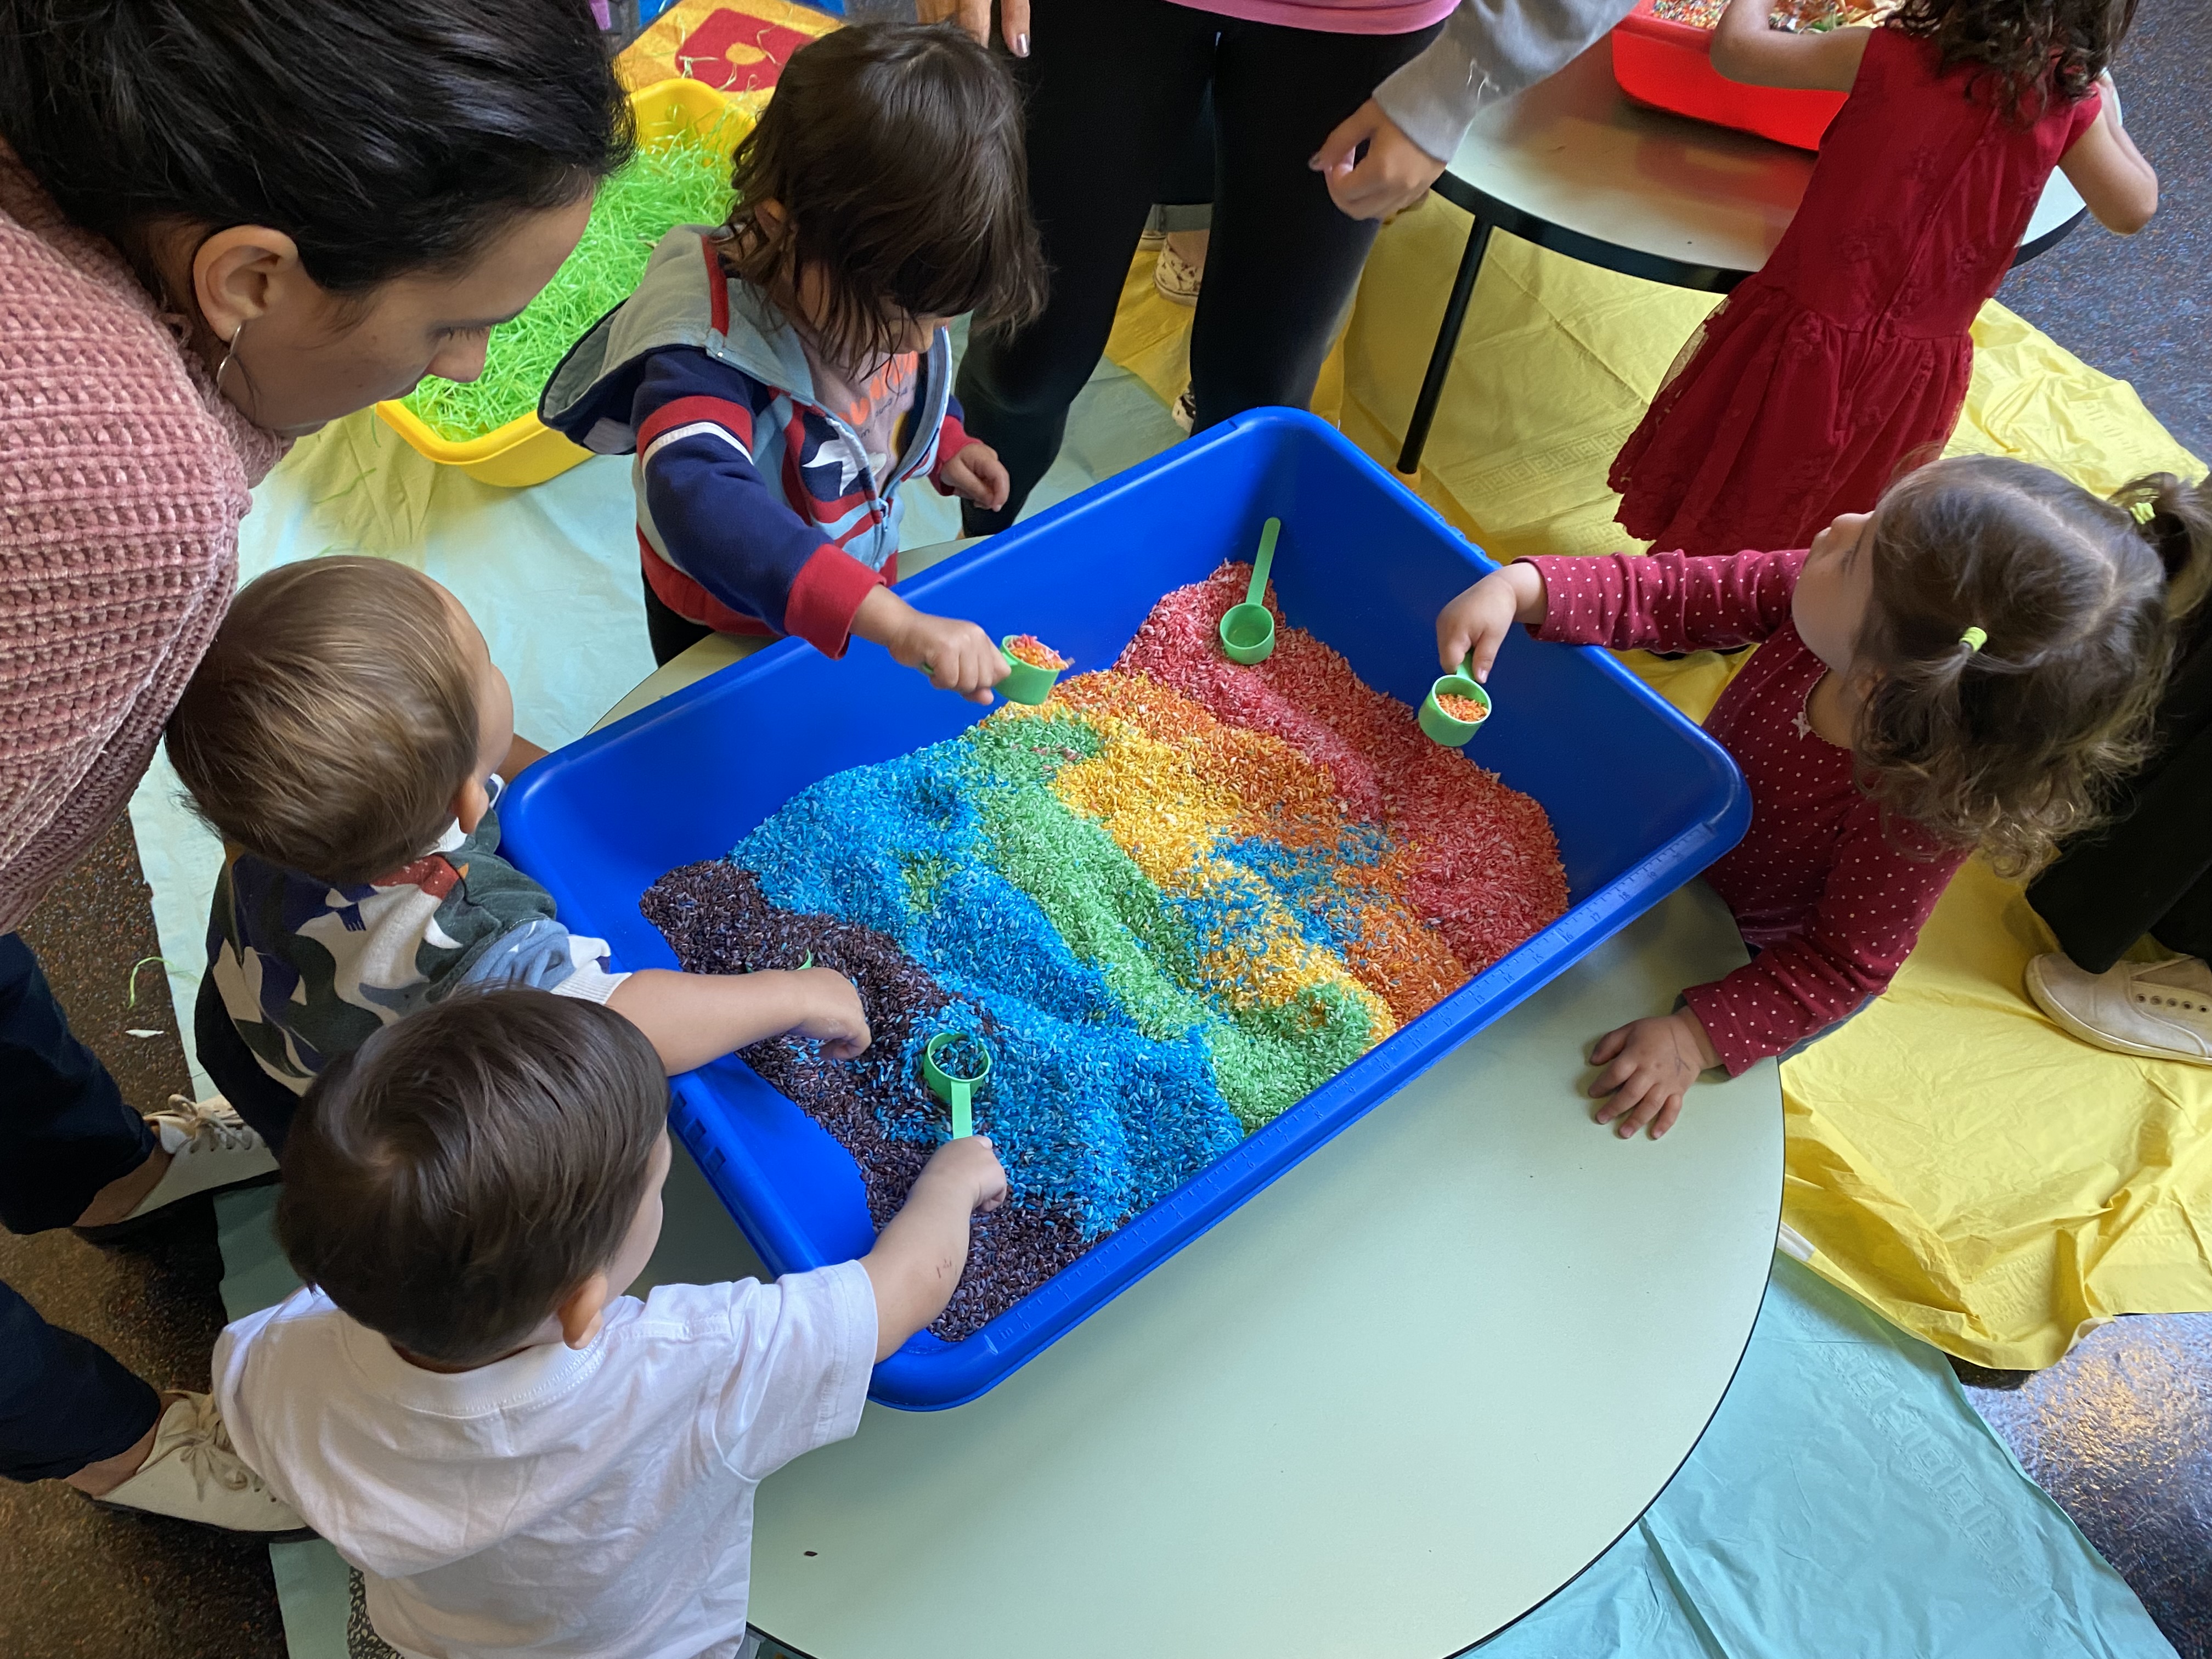 Preschoolers engaging in sensory play with rainbow rice and scoopers